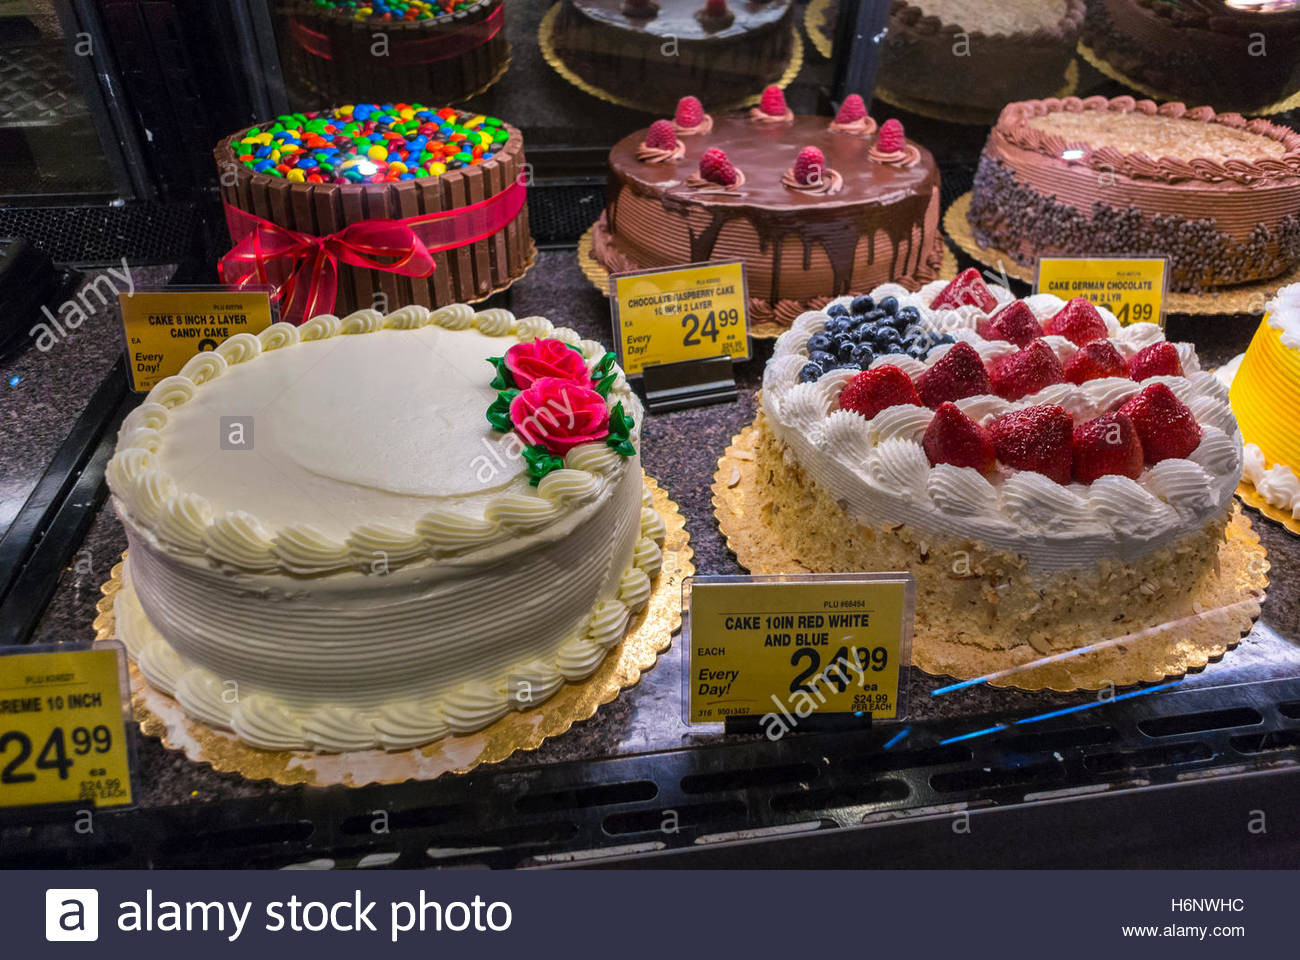 The top 20 Ideas About Safeway Bakery Birthday Cakes - Safeway Bakery BirthDay Cakes Elegant Safeway Bakery Cake Of Safeway Bakery BirthDay Cakes